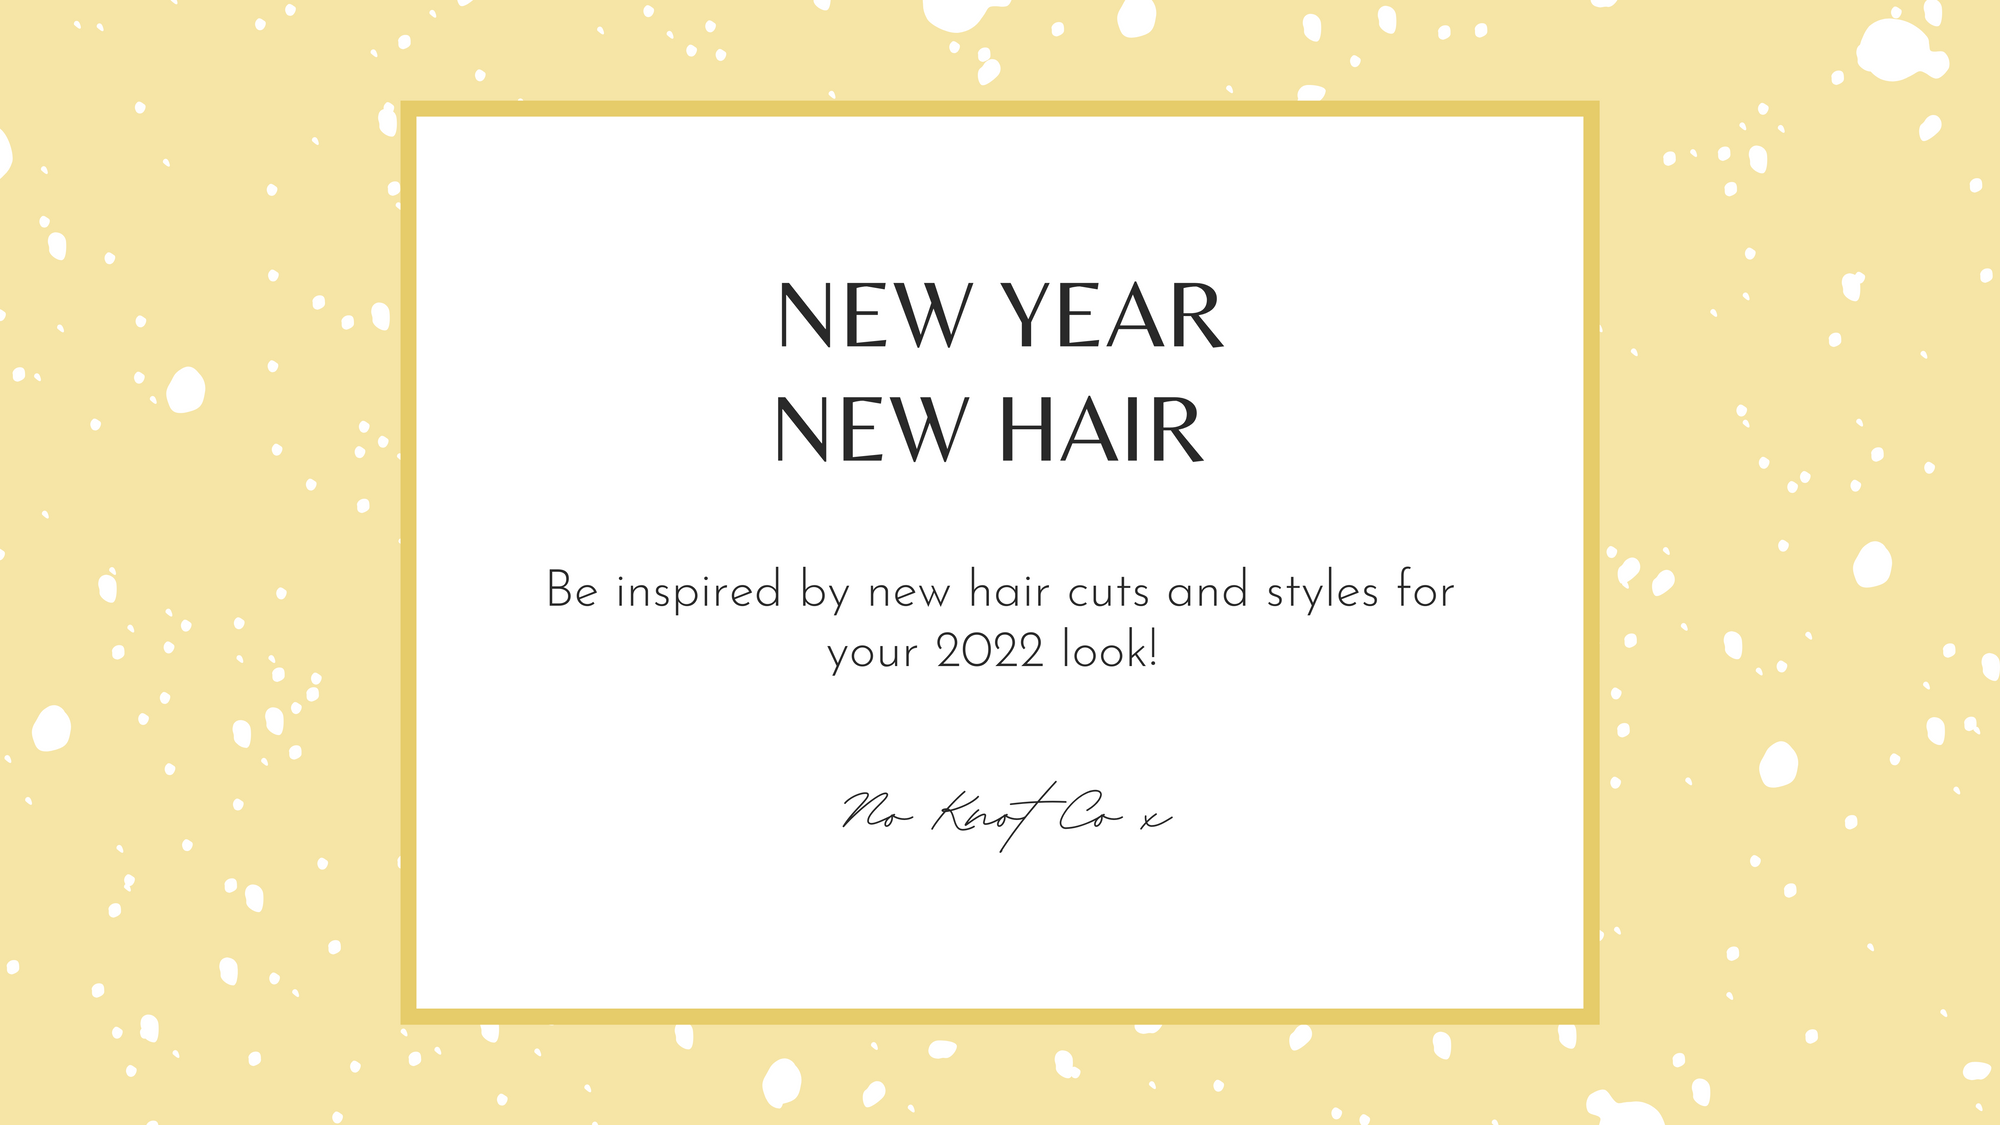 New Year New Hair from No Knot Co 